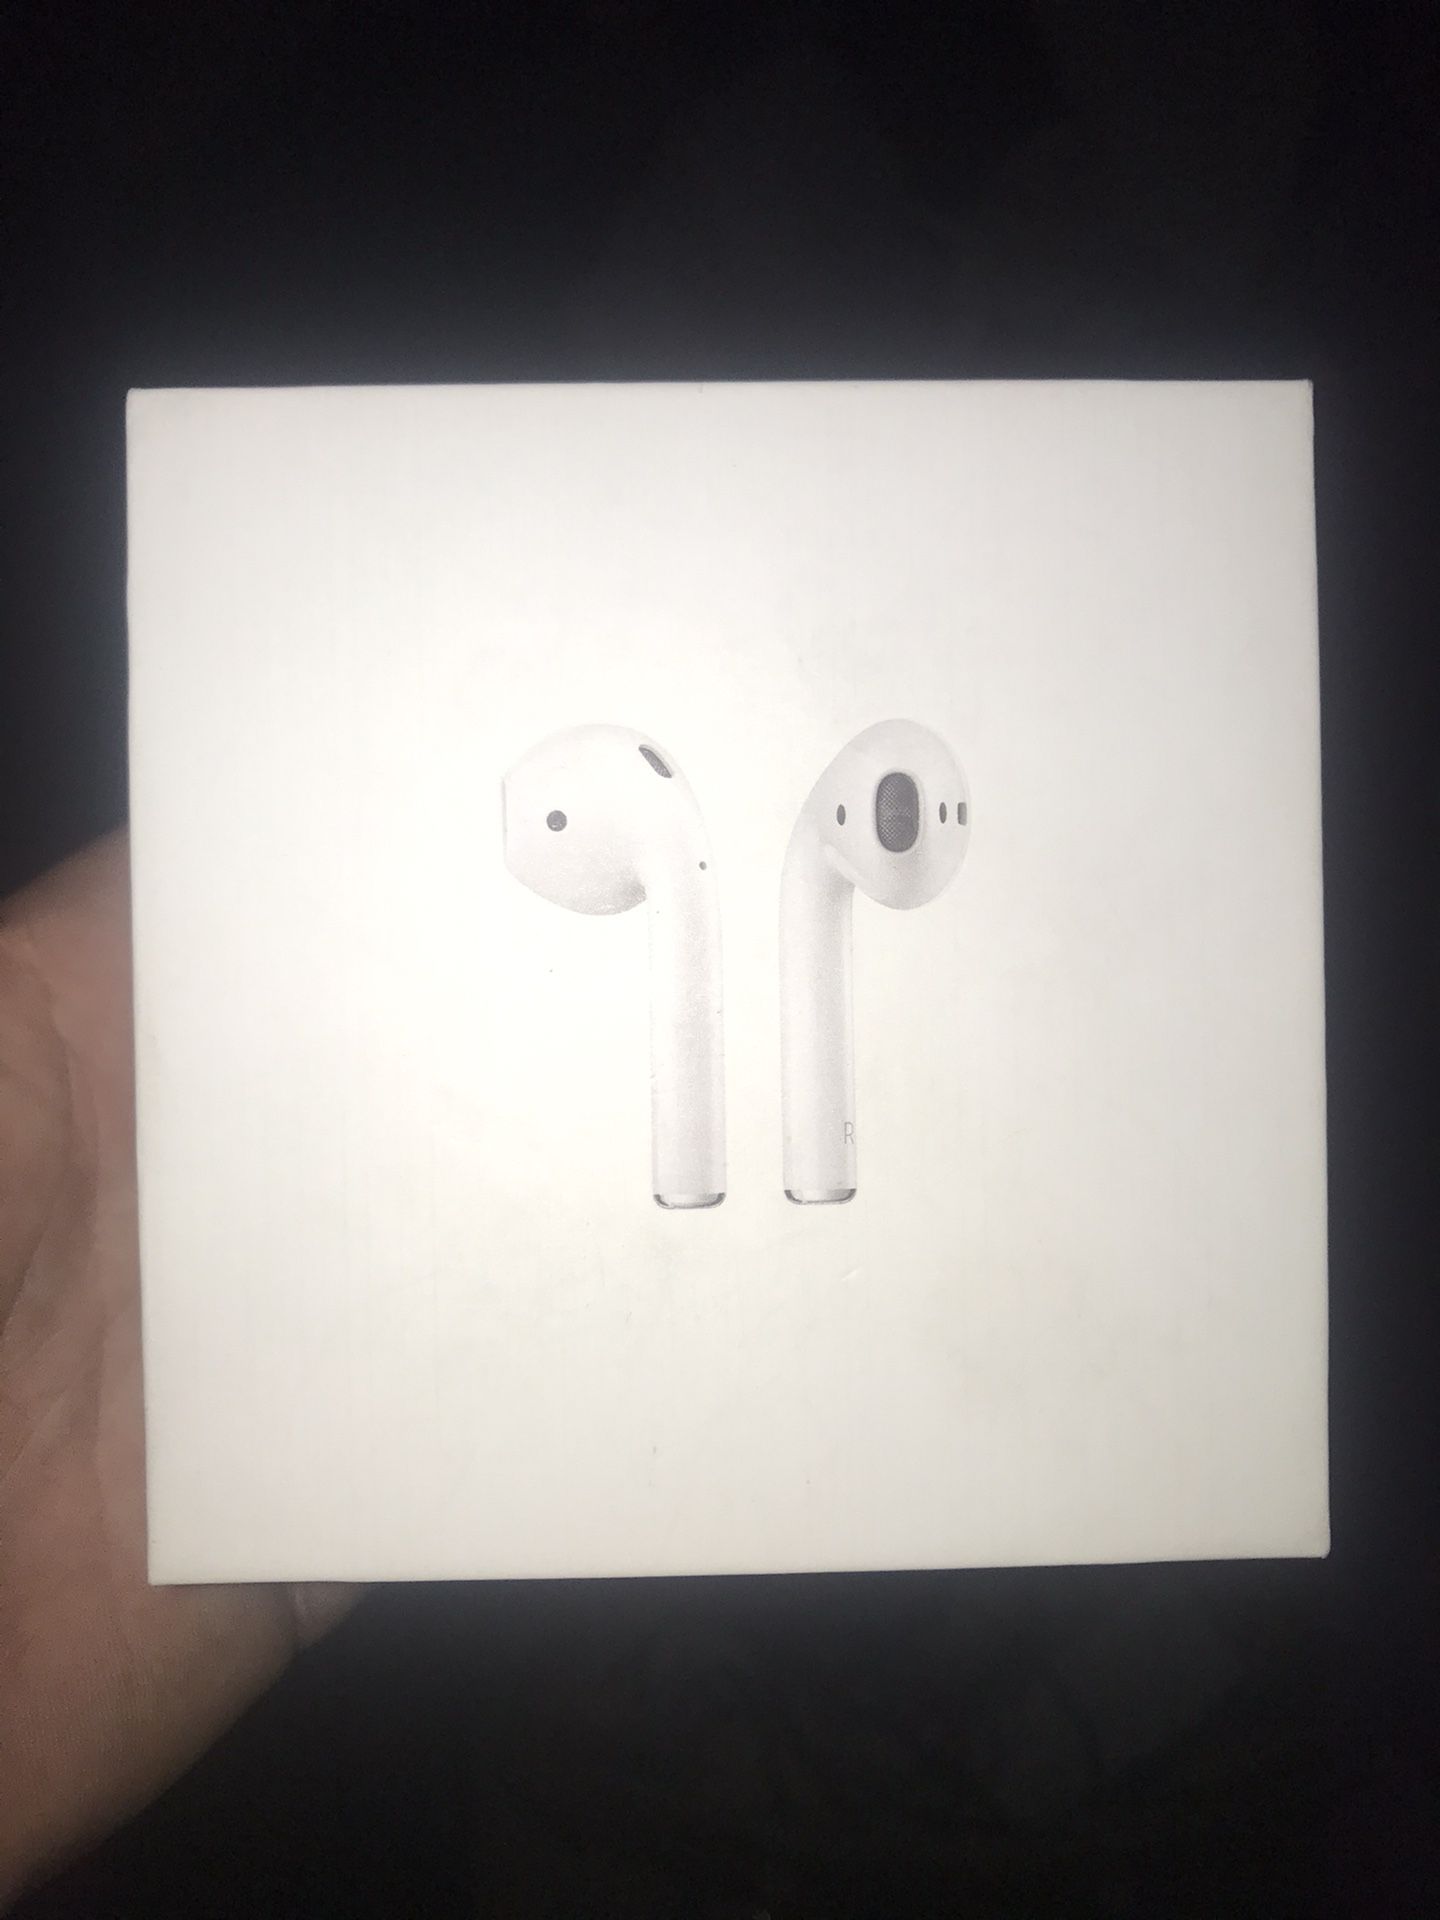 Gen 2 Apple AirPods (Missing right pod)